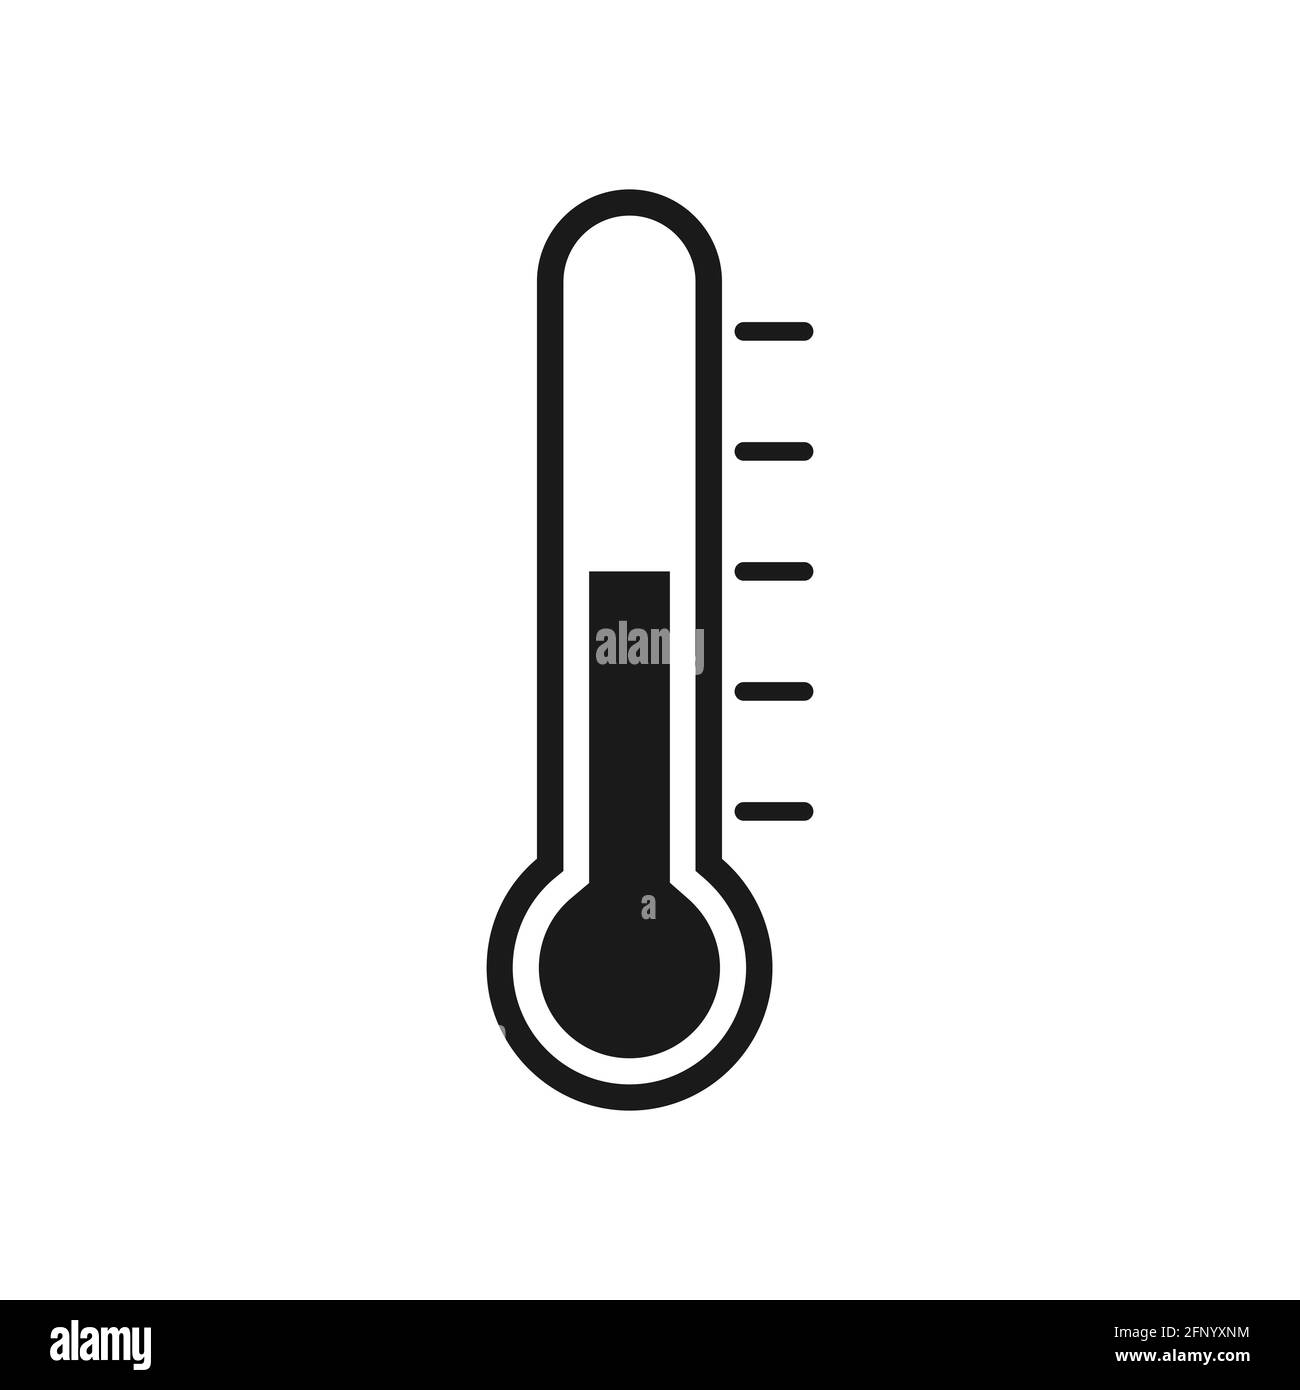 Thermometer icon. Measurement instrument. Weather thermometer black silhouette. Medical device. Vector illustration isolated on white. Stock Vector